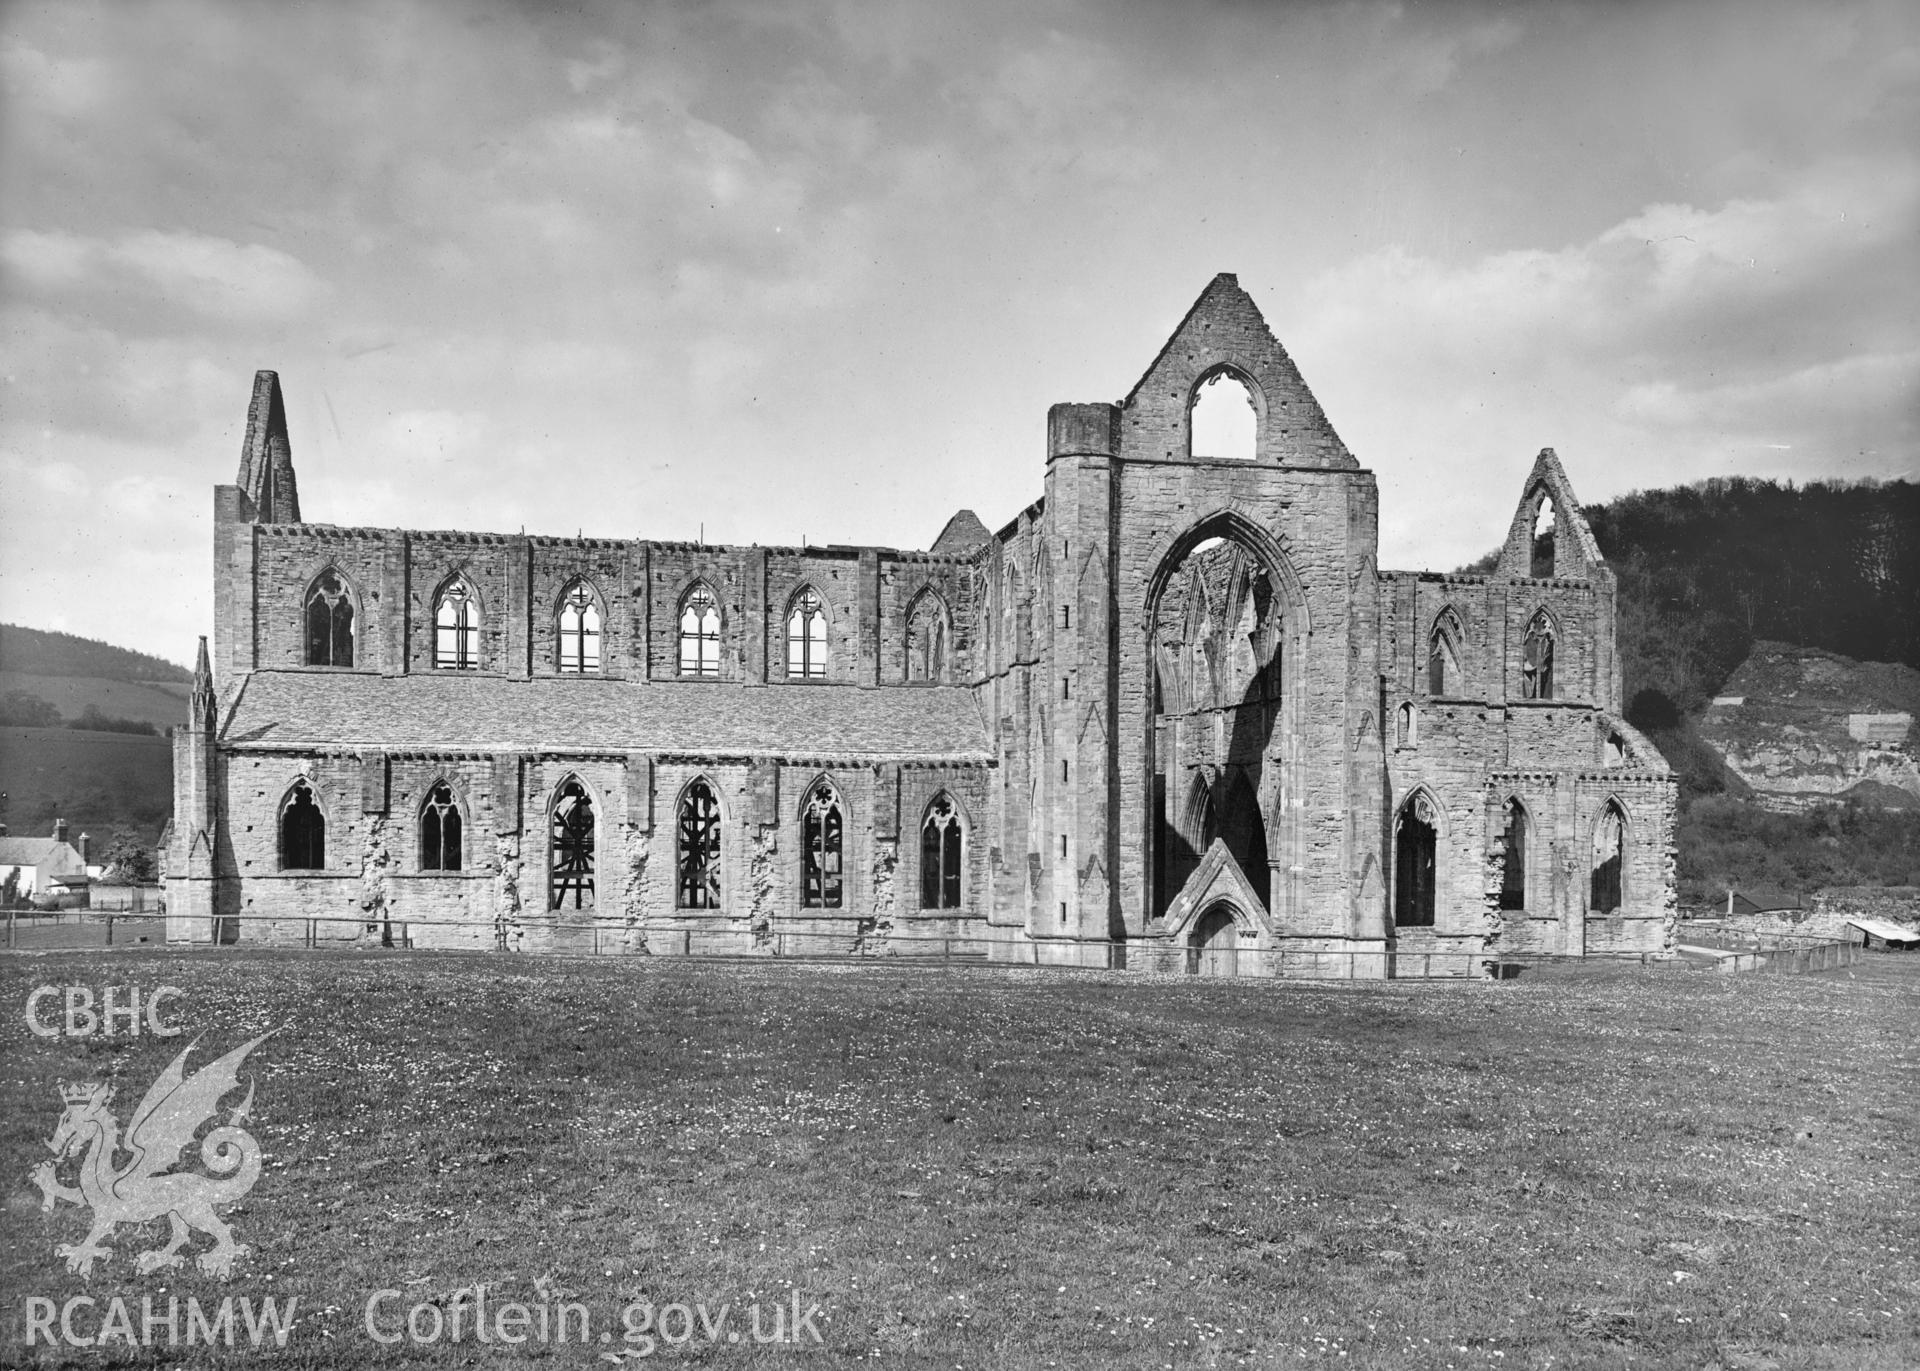 Digital copy of a photograph showing general view of Tintern Abbey from the south, taken by F H Crossley, c.1948.